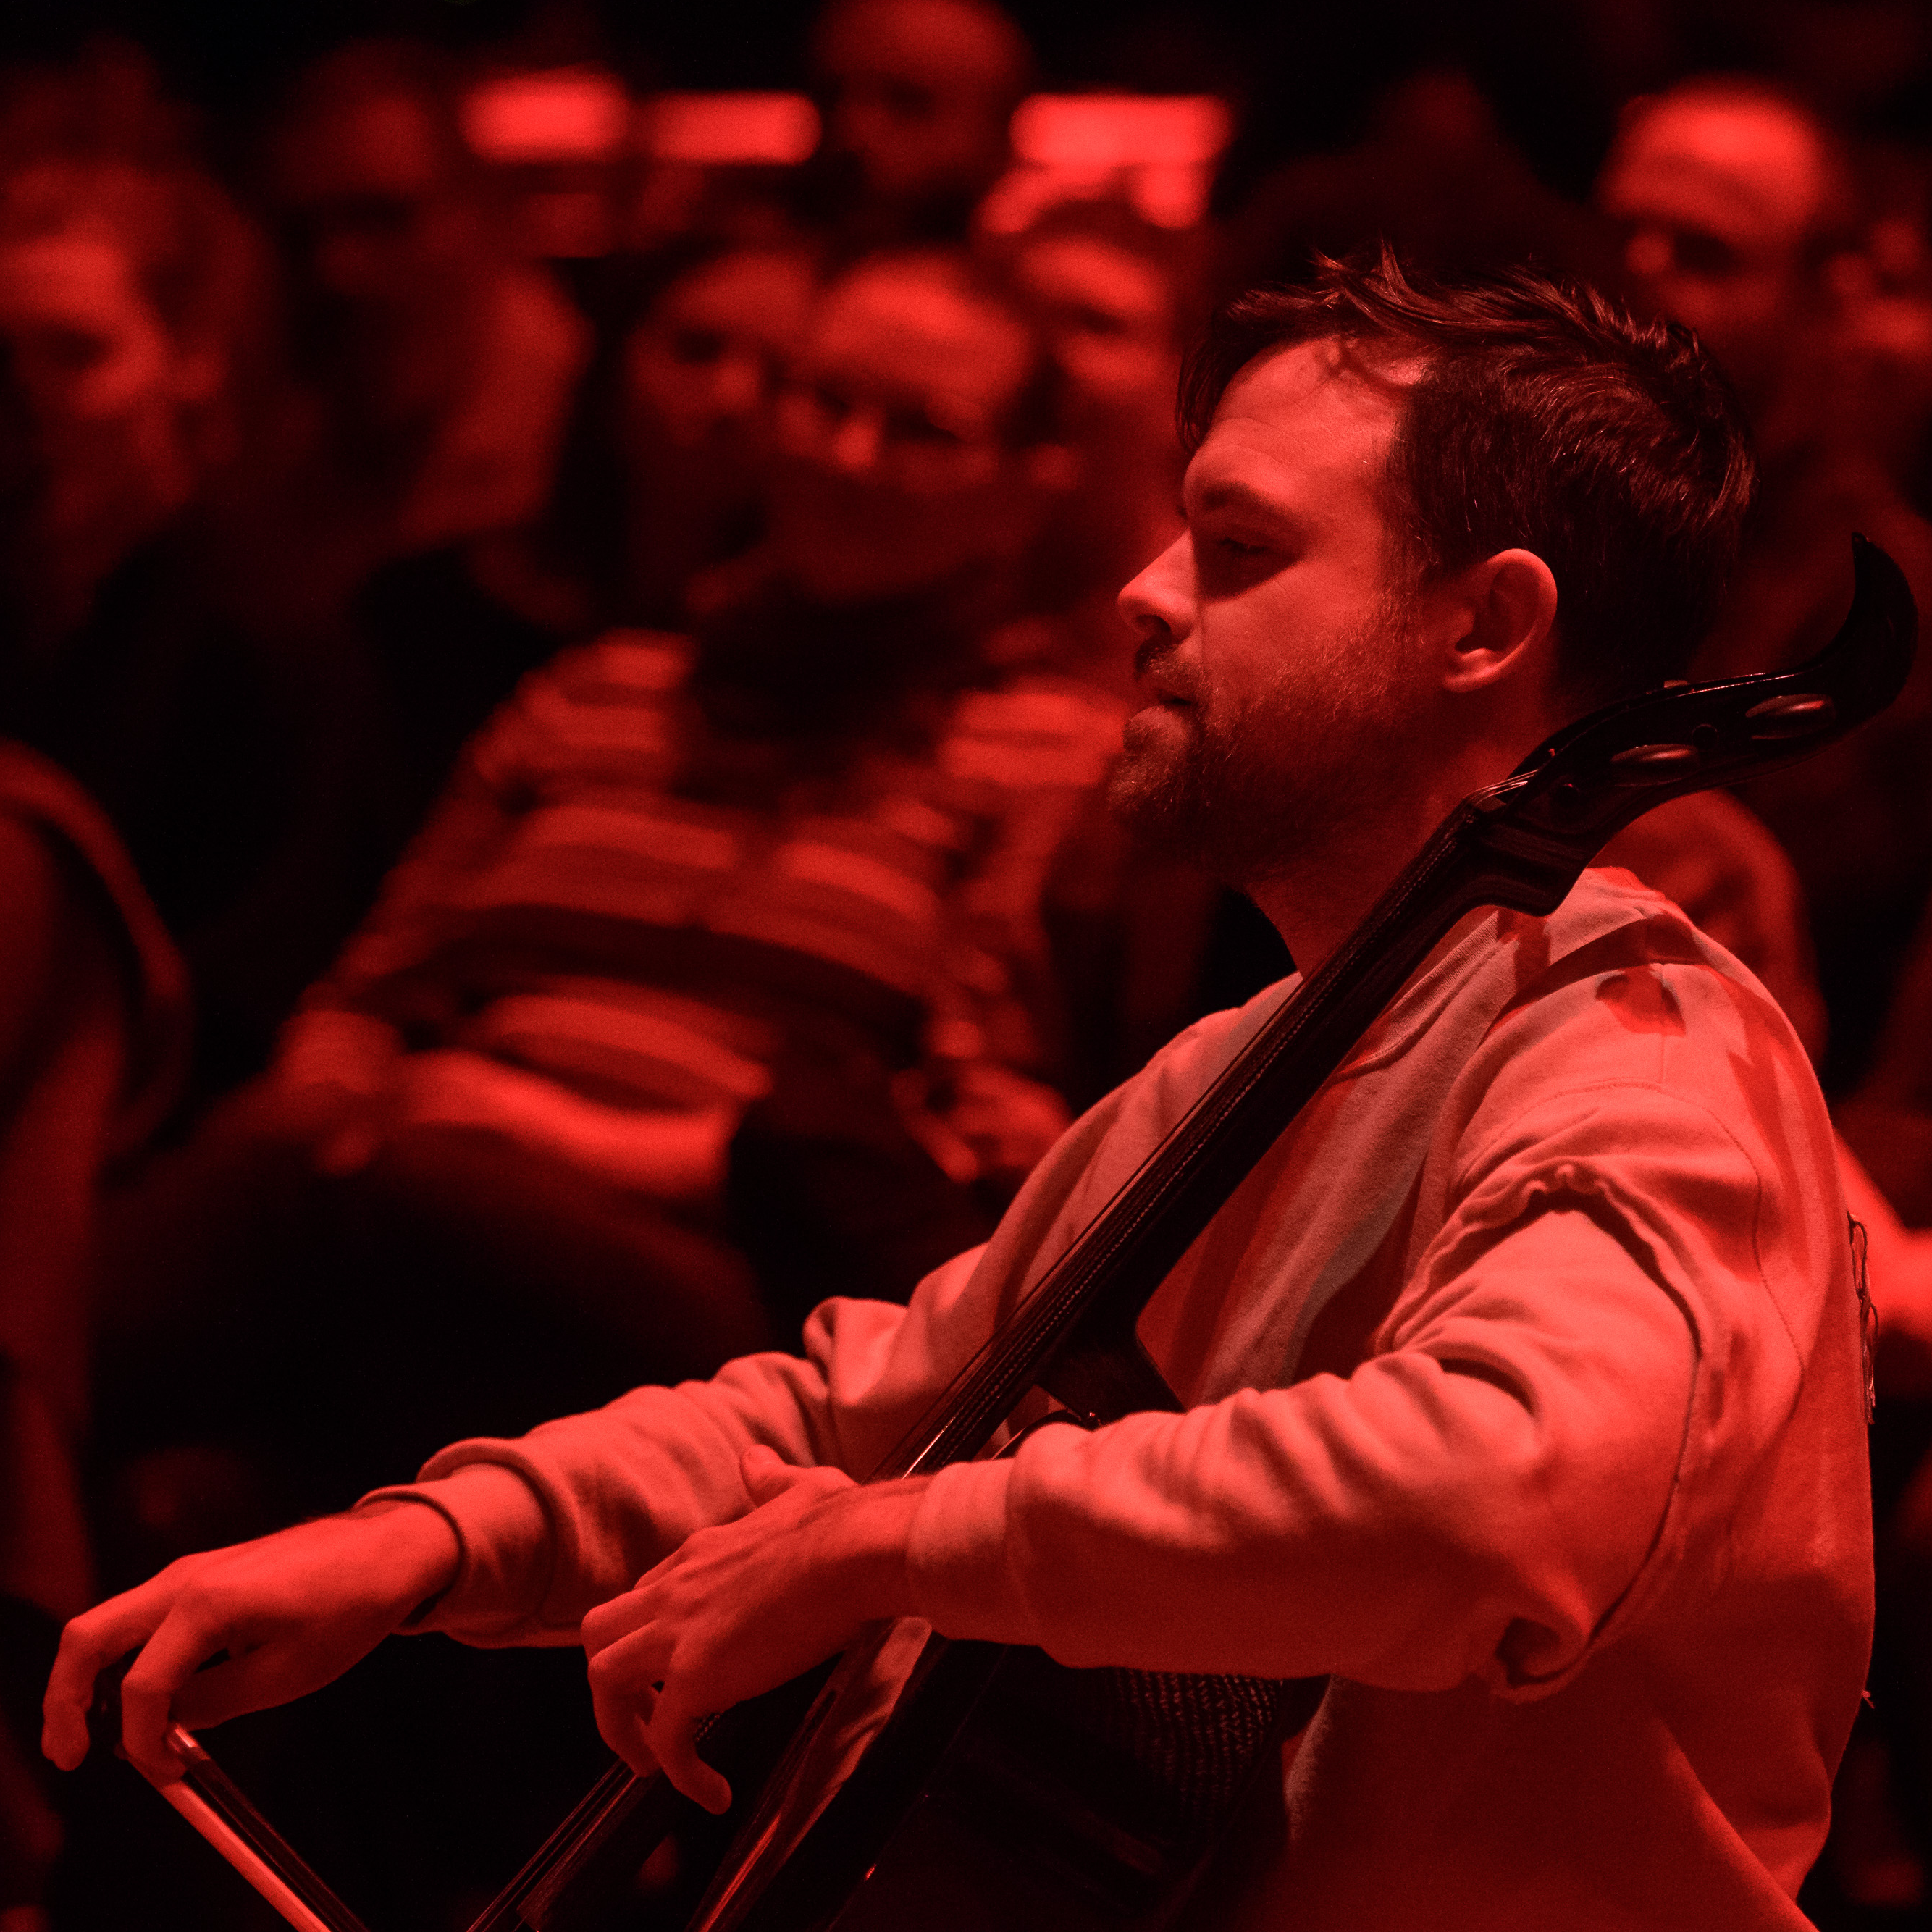 Photograph with a red tint of Ethan Philbrick playing a cello.